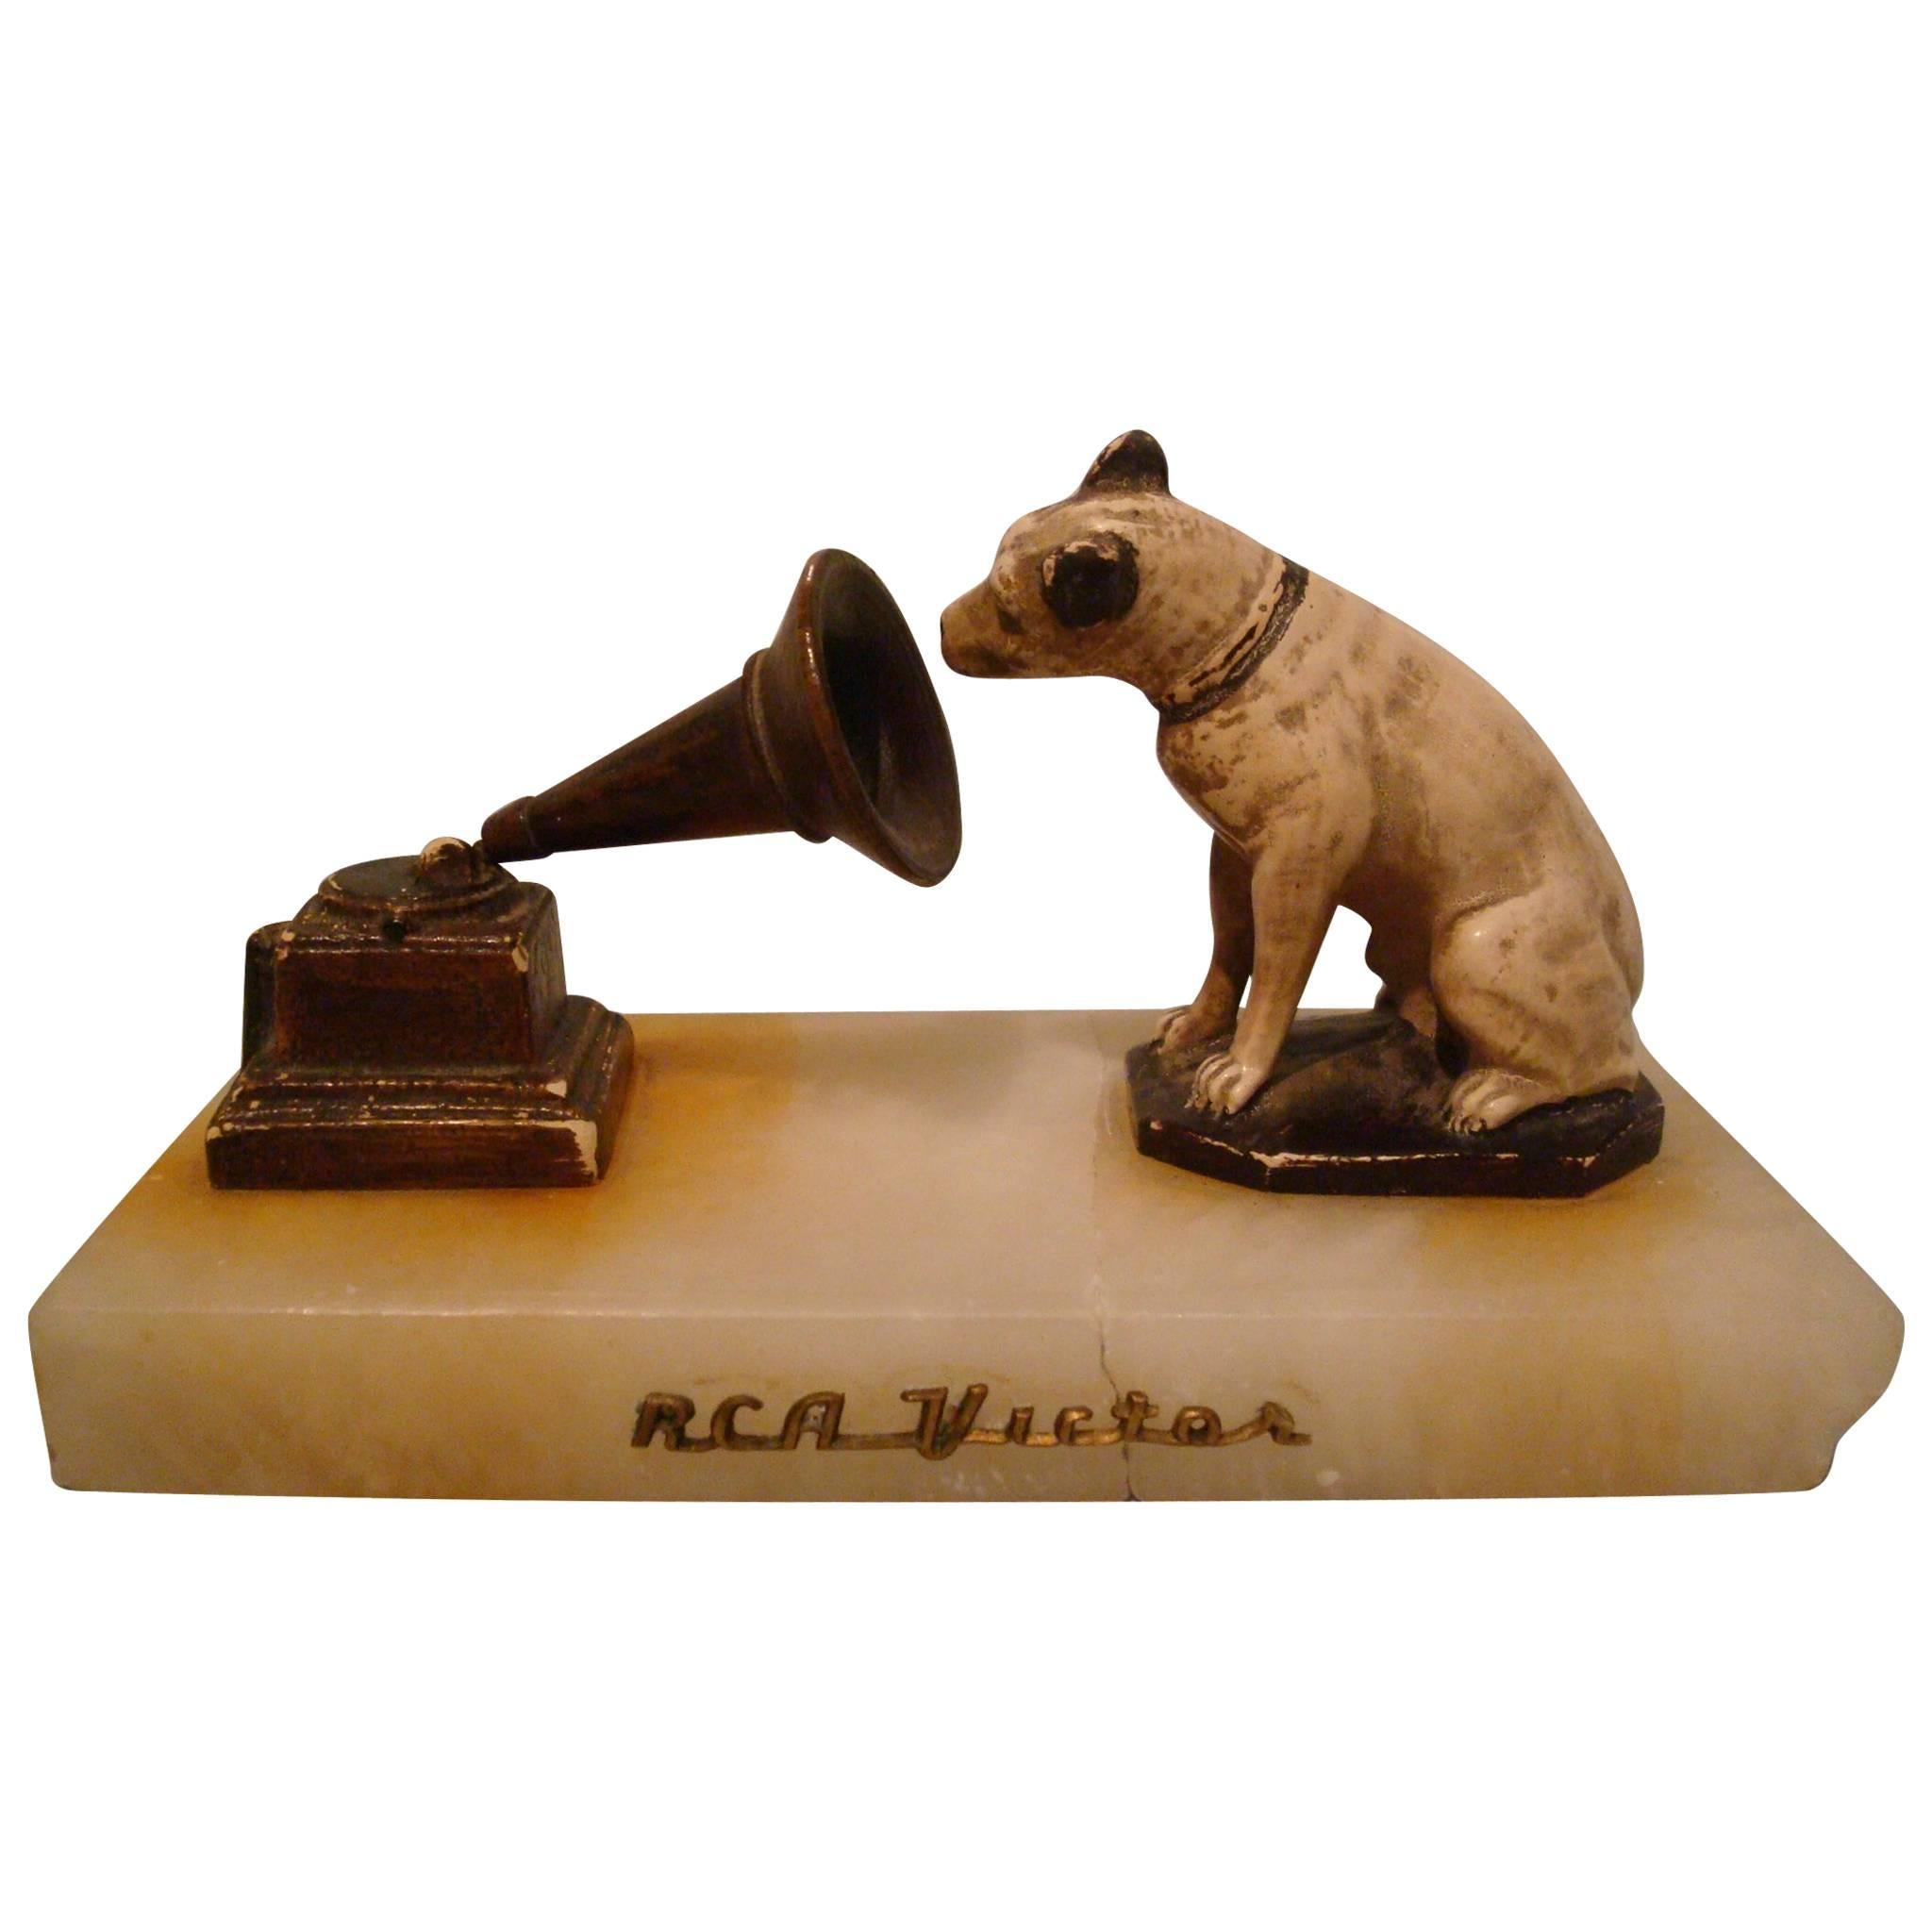 R.C.A. Victor - Nipper Sculpture Paperweight Advertising, 1910